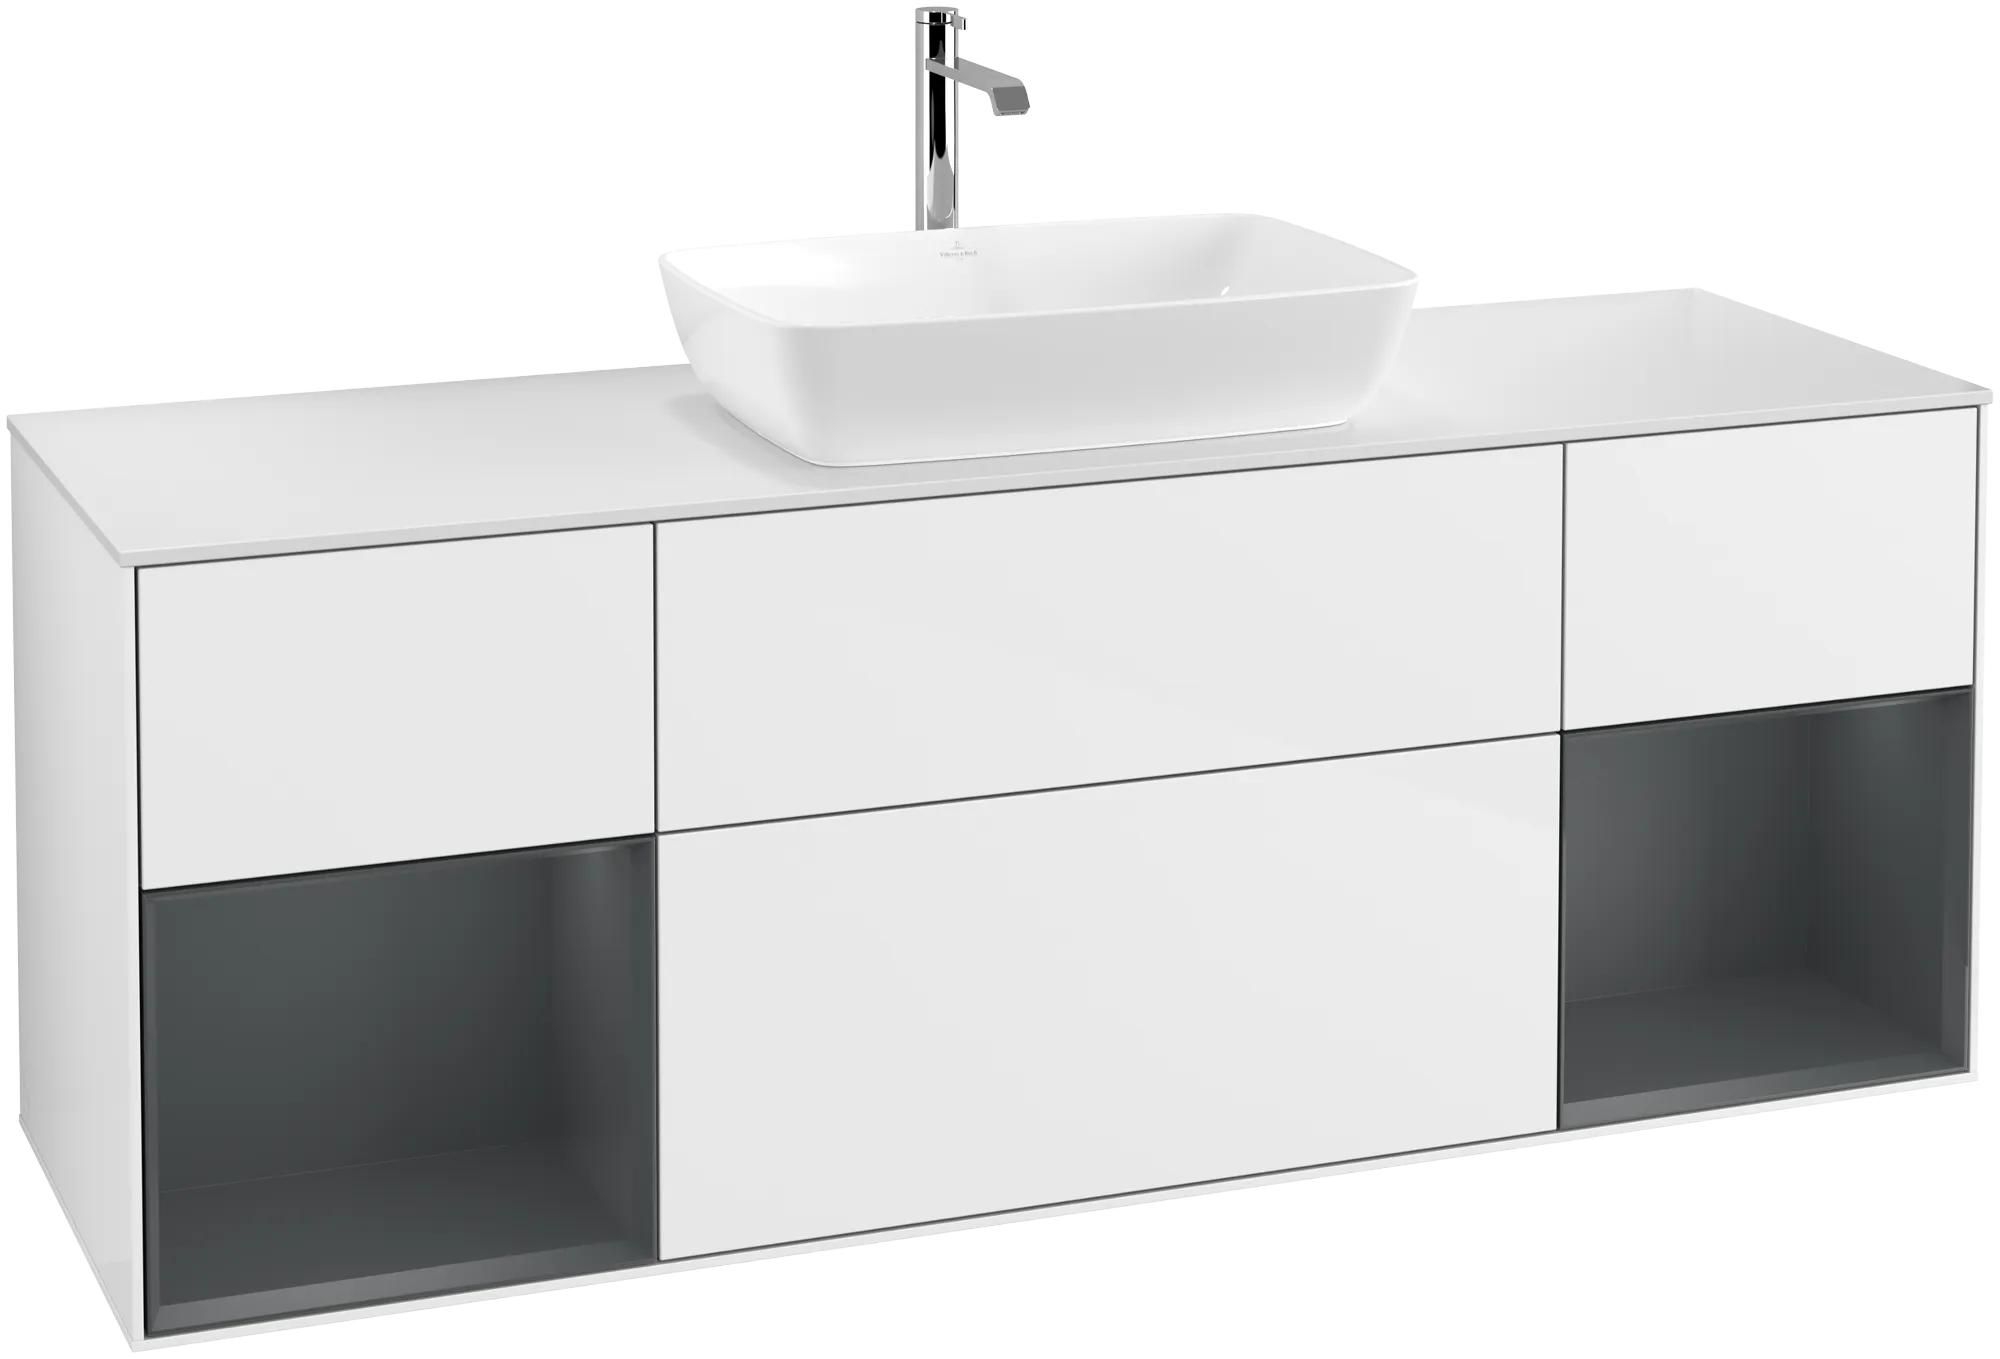 Зображення з  VILLEROY BOCH Finion Vanity unit, with lighting, 4 pull-out compartments, 1600 x 603 x 501 mm, Glossy White Lacquer / Midnight Blue Matt Lacquer / Glass White Matt #G861HGGF